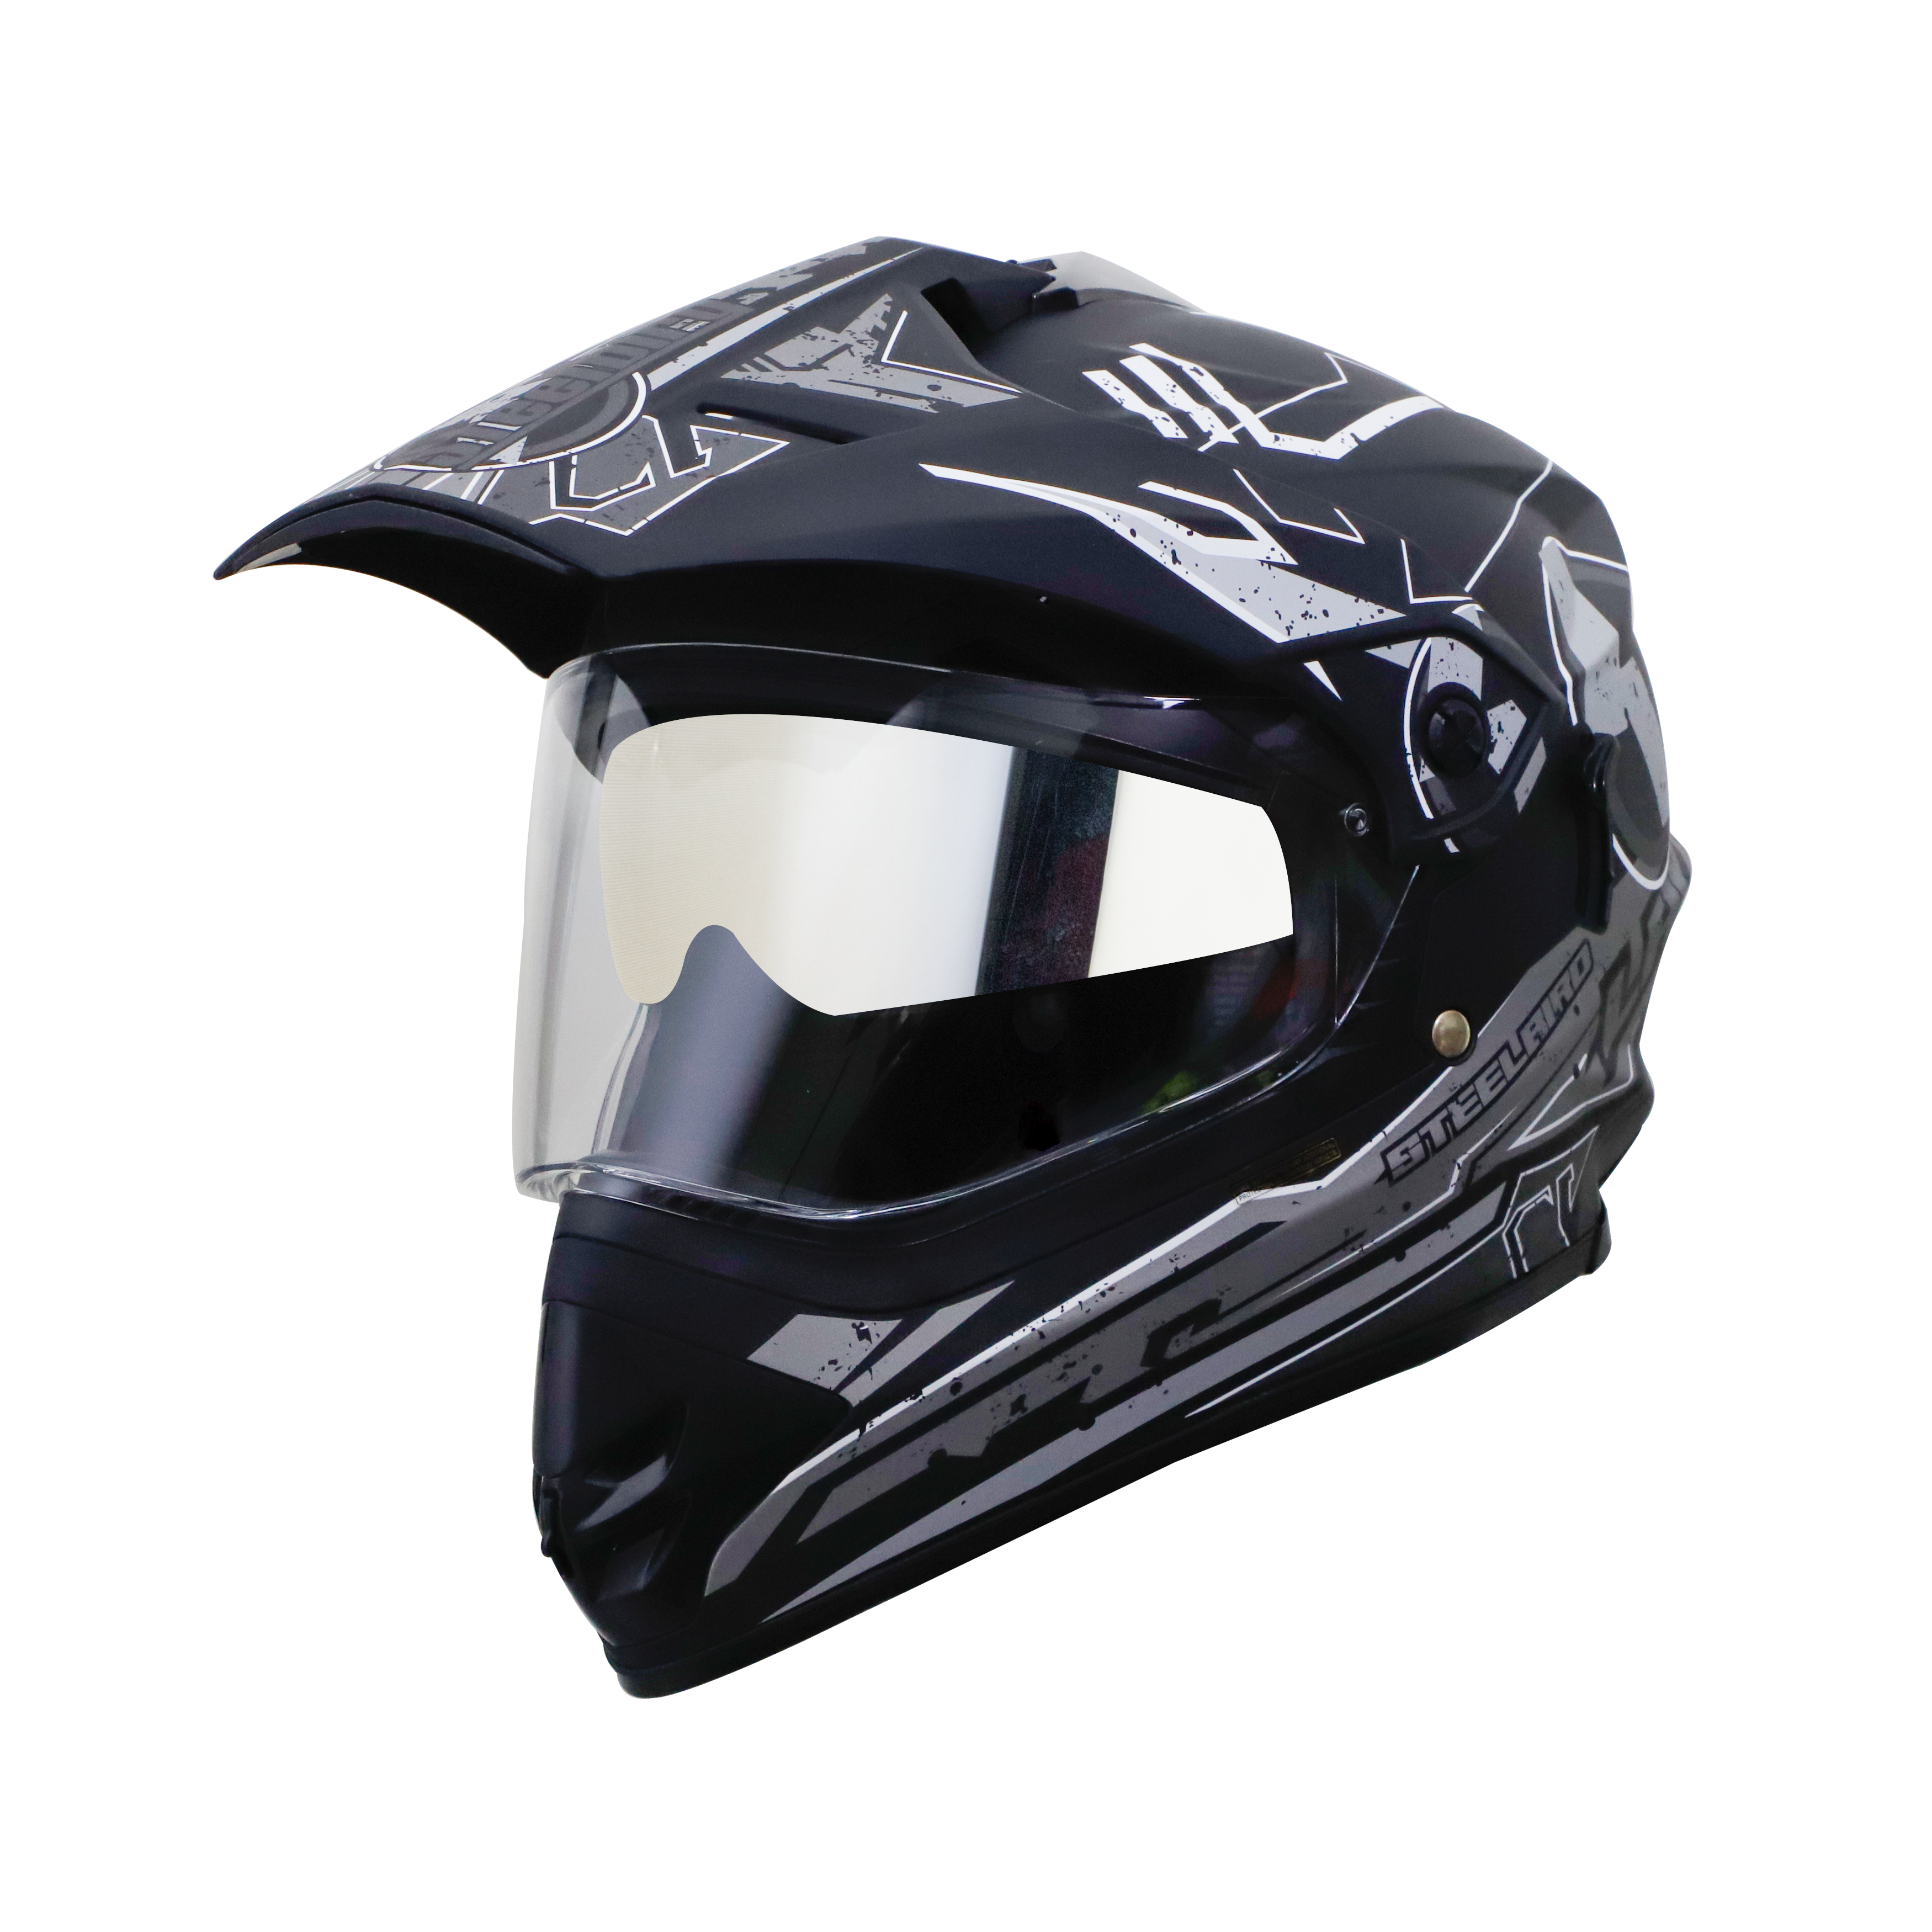 SB-42 BANG LAP GLOSSY BLACK WITH GREY (WITH CHROME SILVER INNER SUN SHIELD)